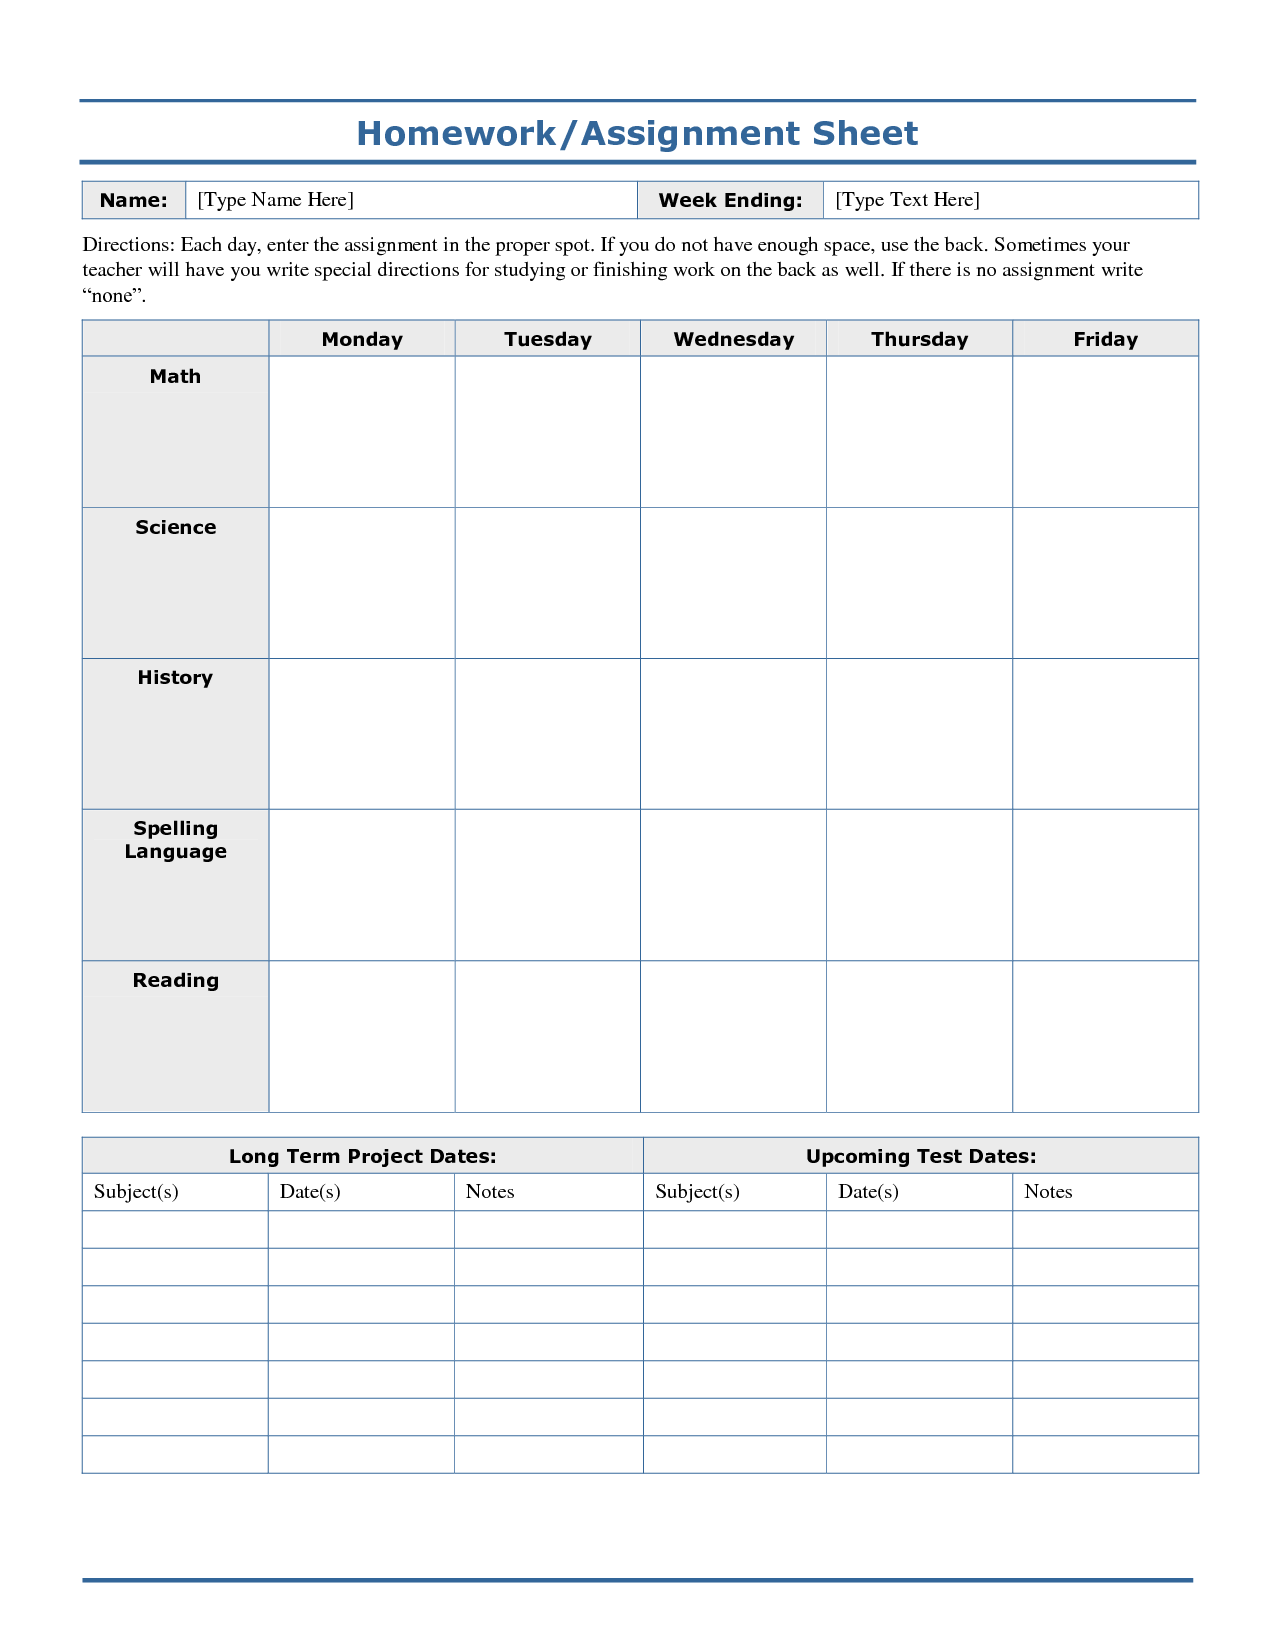 Free Printable Daily Homework Assignment Sheet Template